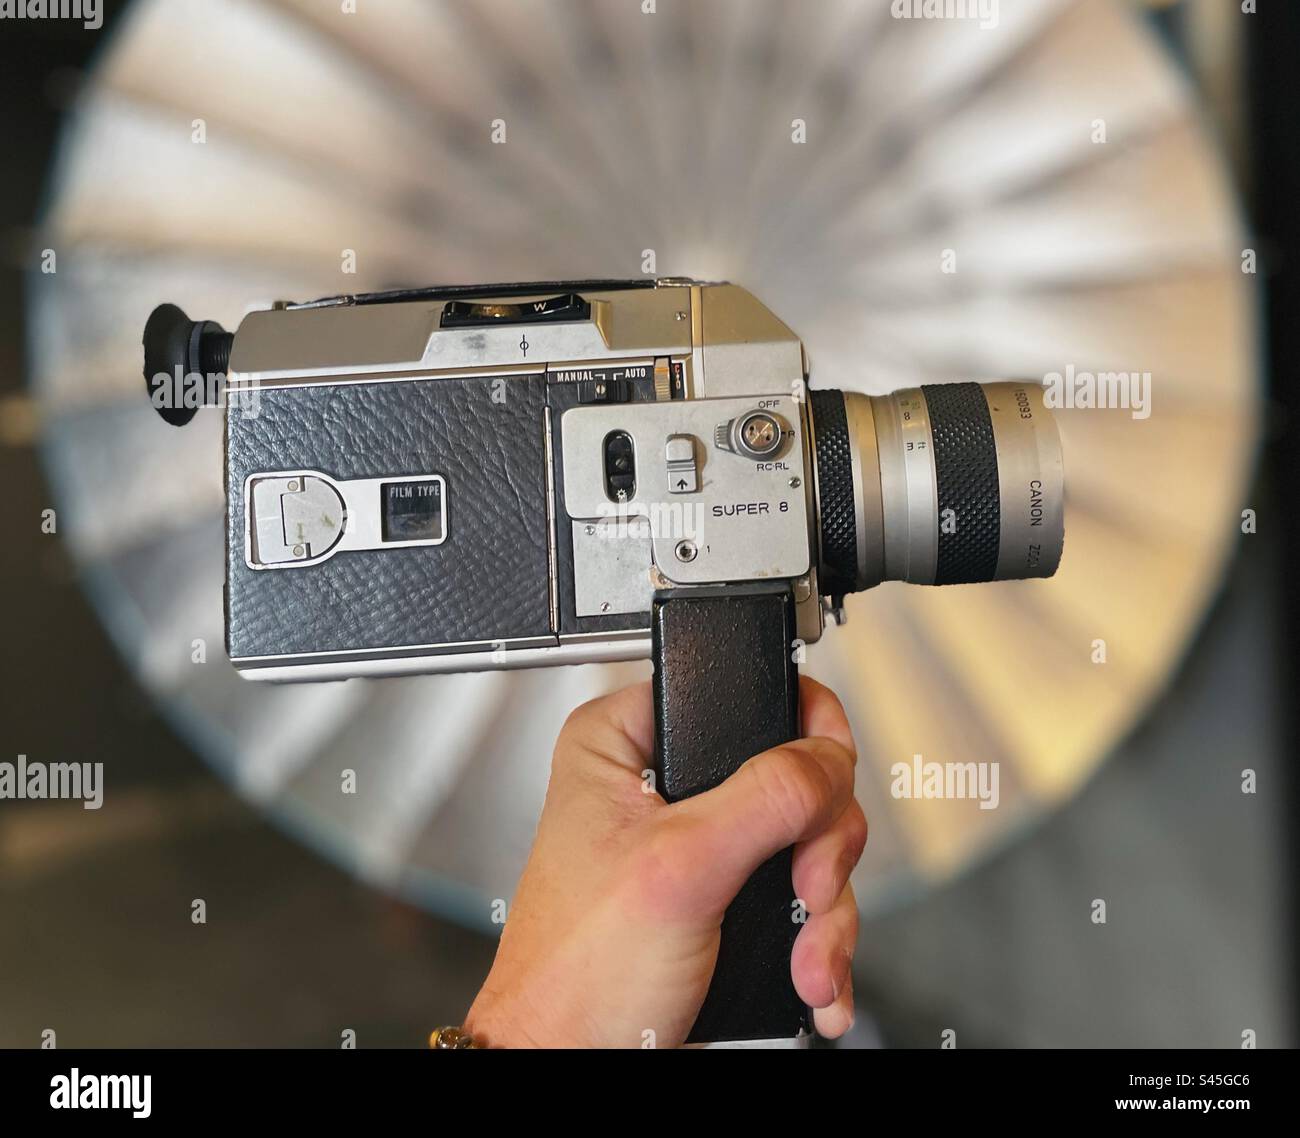 Vintage super 8 film camera with studio lights in the background Stock Photo